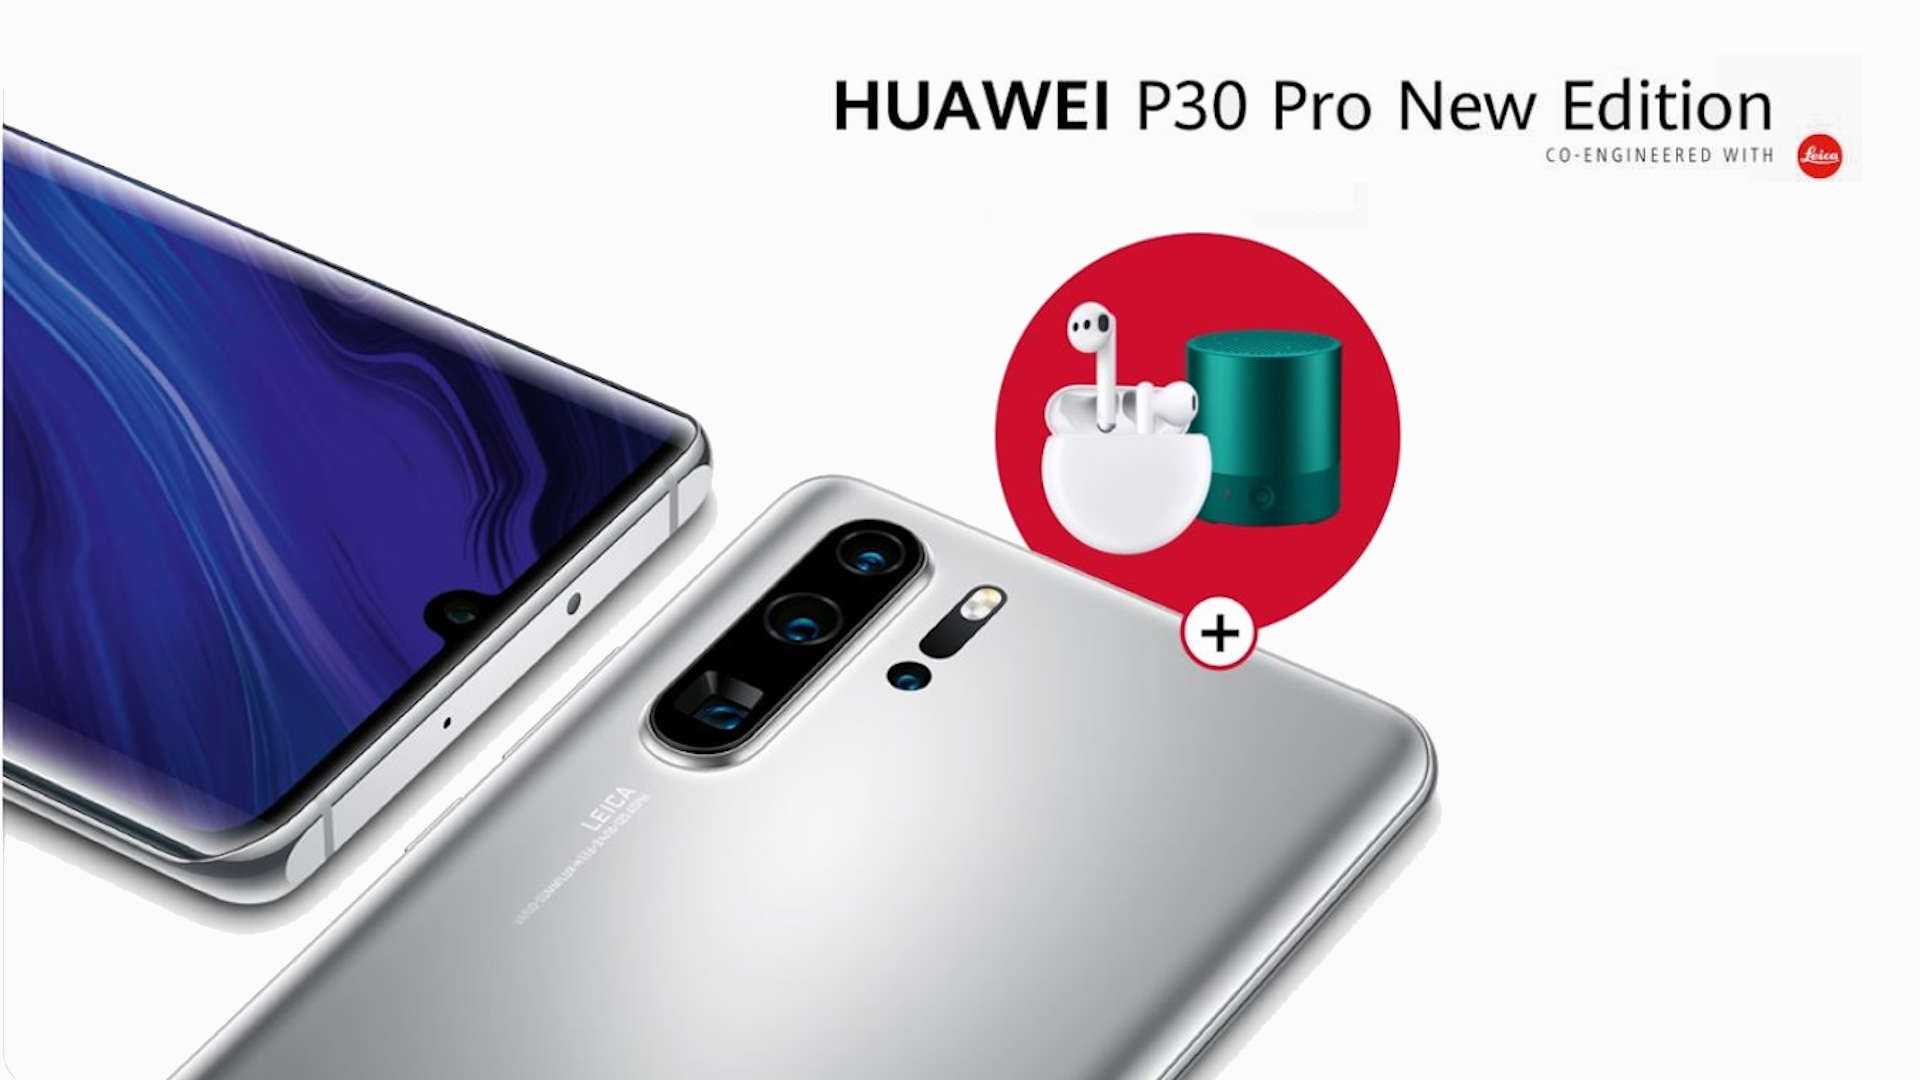 Huawei new edition. Huawei p30 Pro New Edition. Huawei Nova 30 Pro. Huawei p30 Pro 8/256gb. МФУ Huawei Pixlab x1.